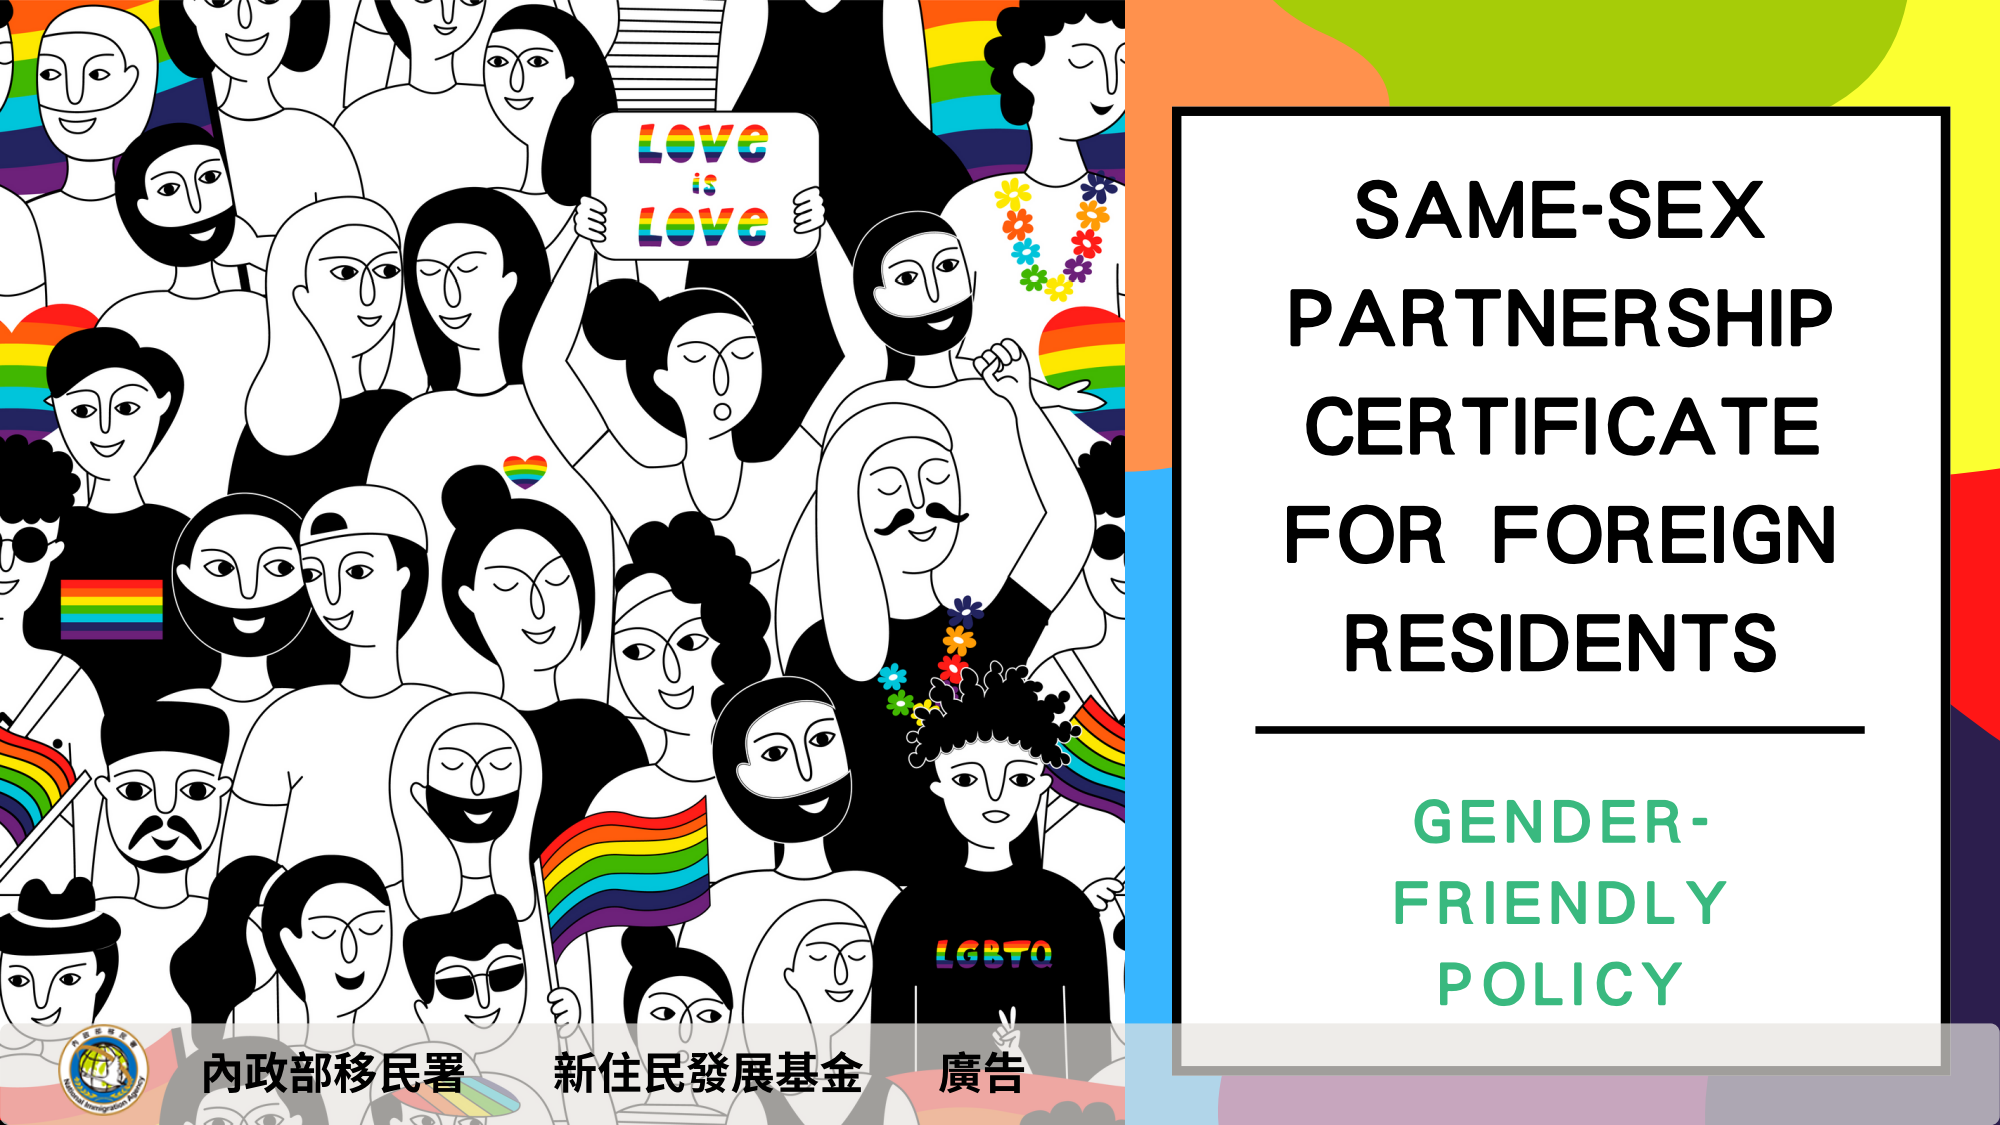 Same-Sex Partnership Certificate for Foreign Residents